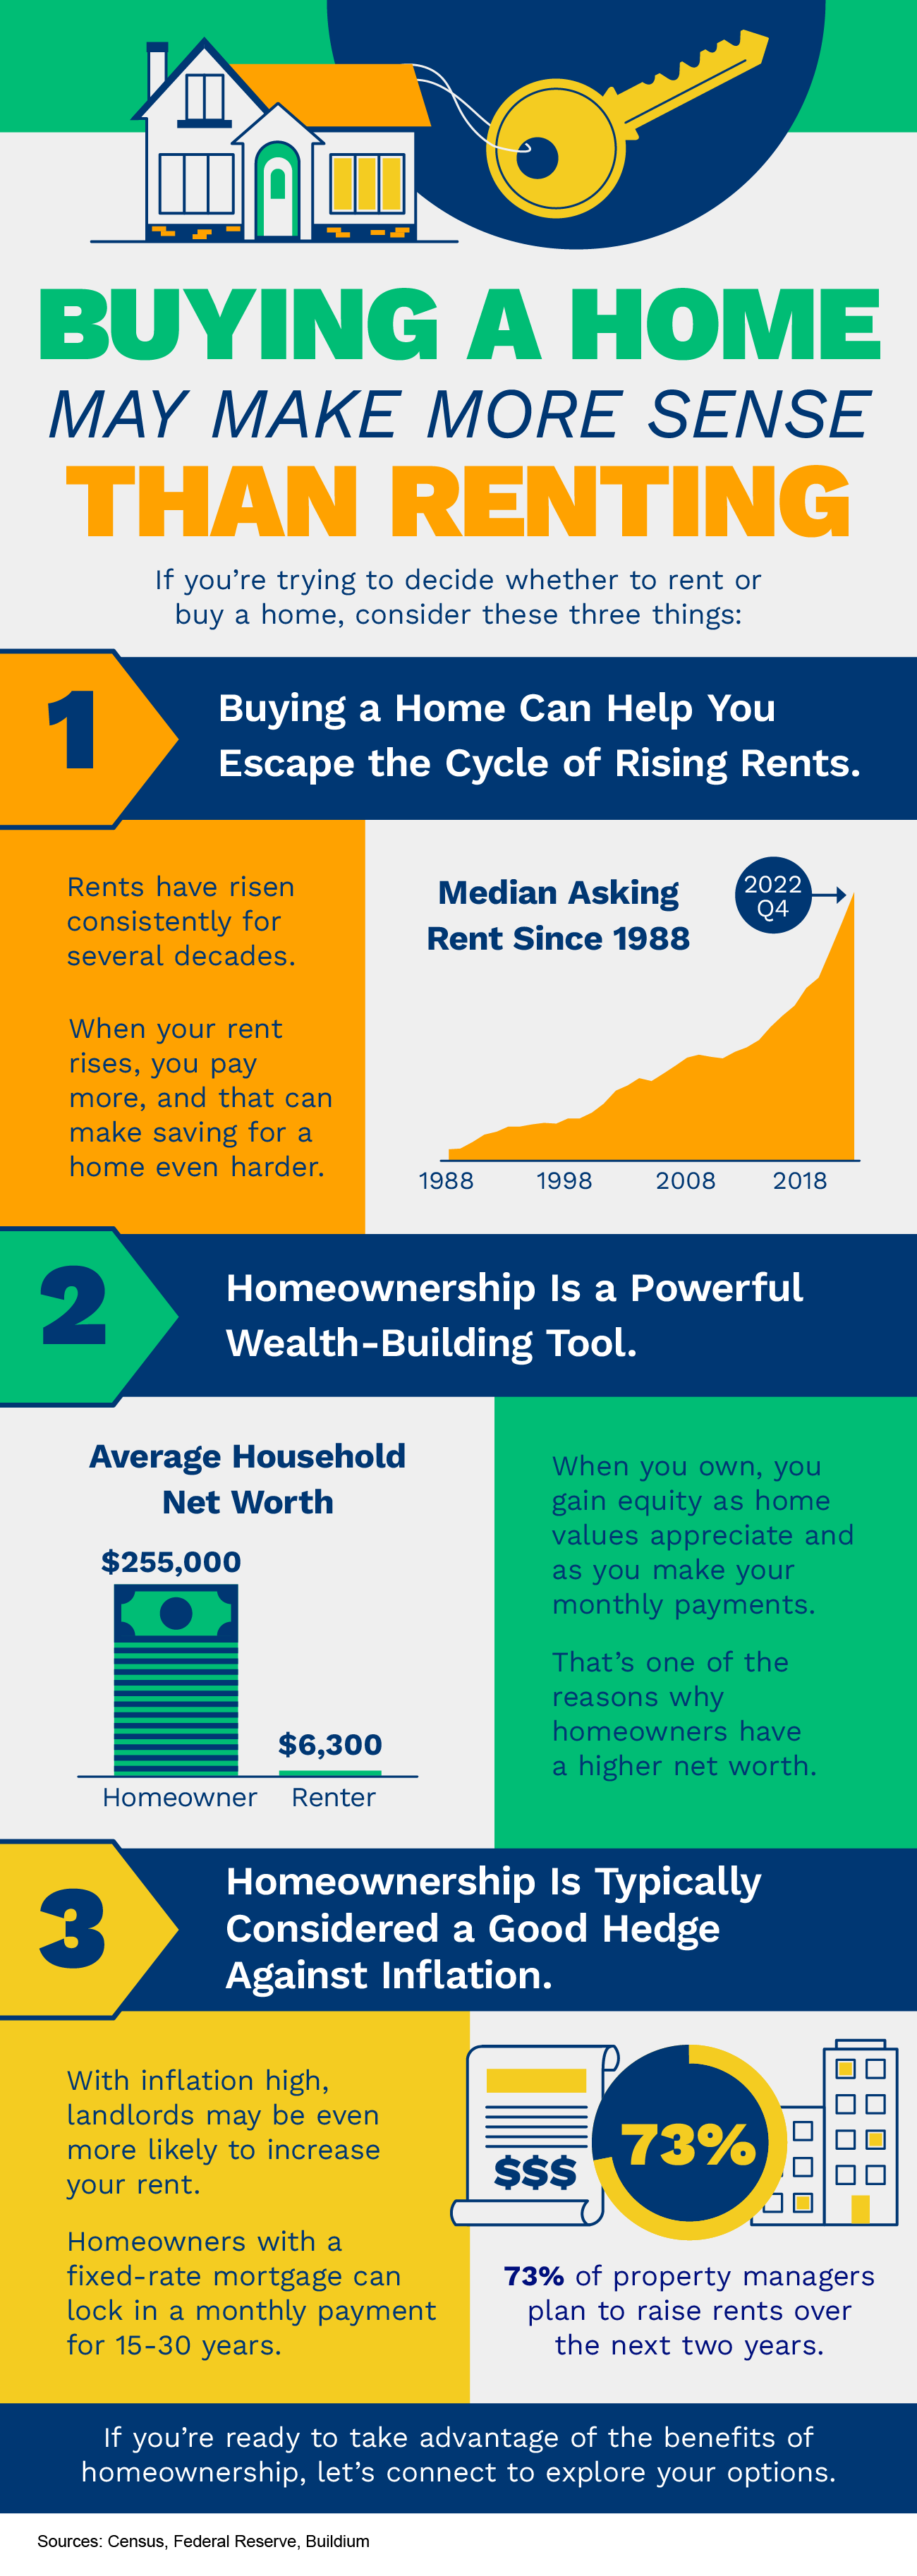  Buying-A-Home-May-Make-More-Sense-Than-Renting-MEM Buying a Home May Make More Sense Than Renting [INFOGRAPHIC]  